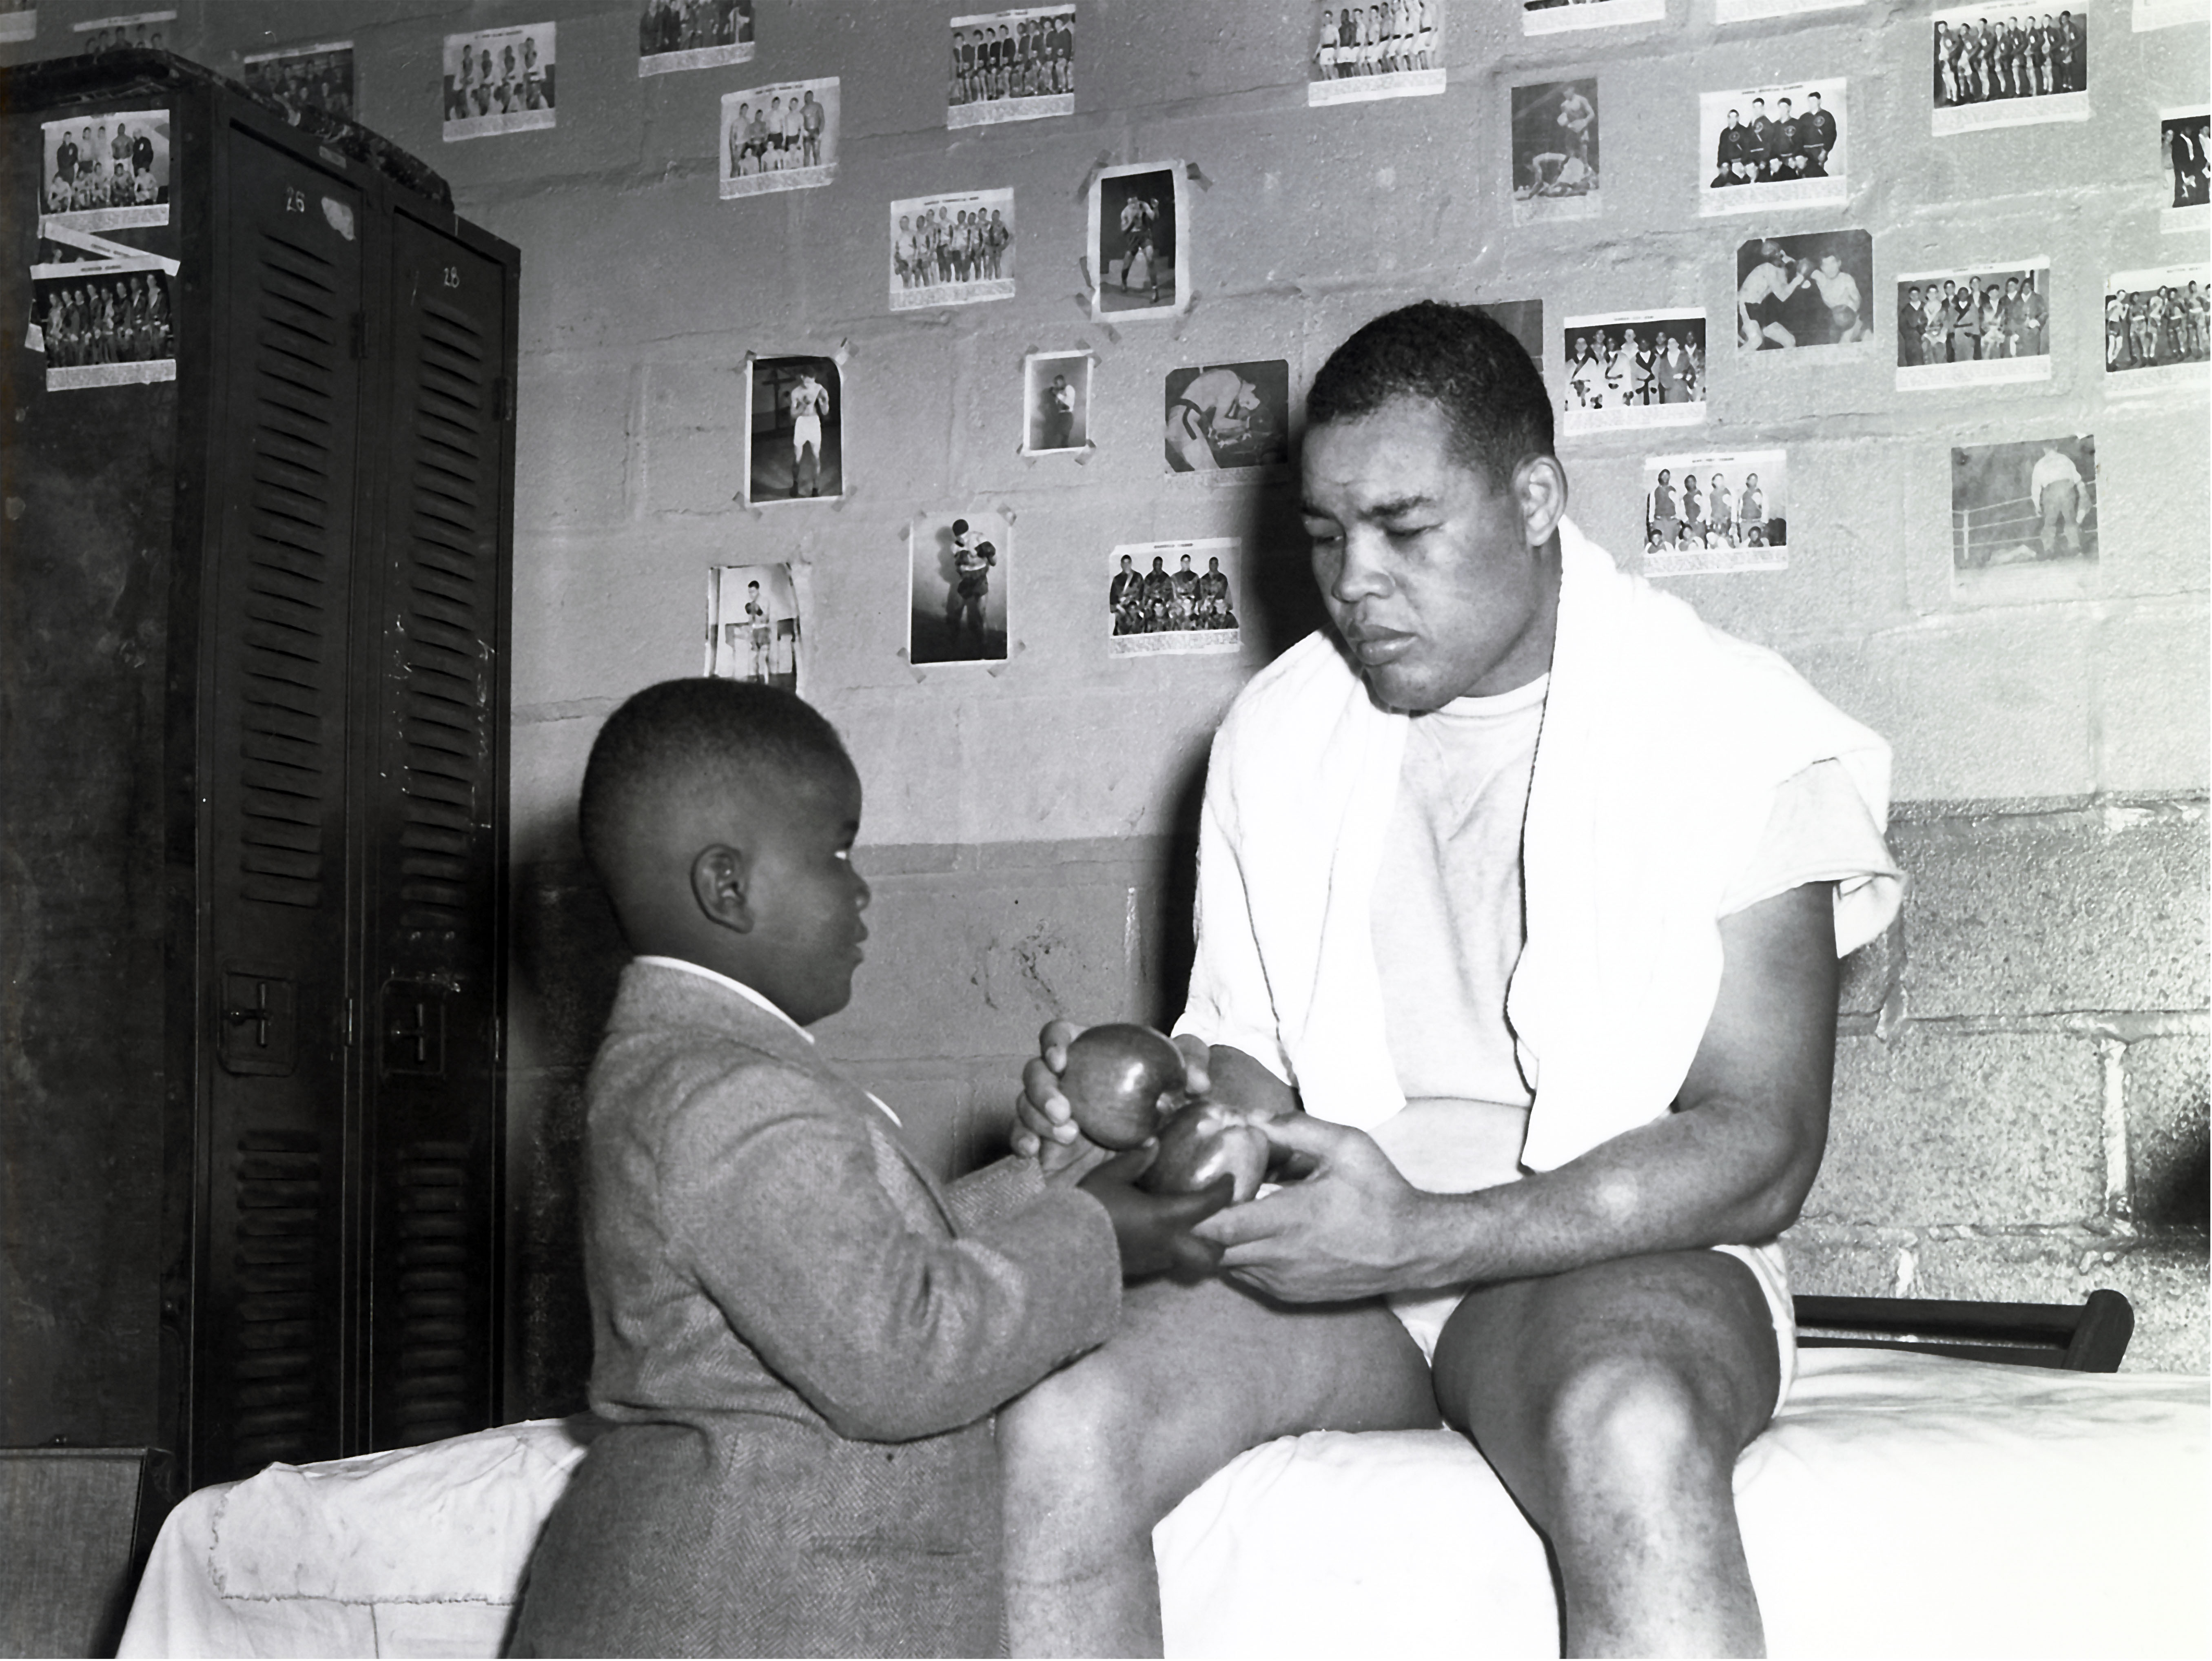 A young boy gives a couple of apples to boxer.